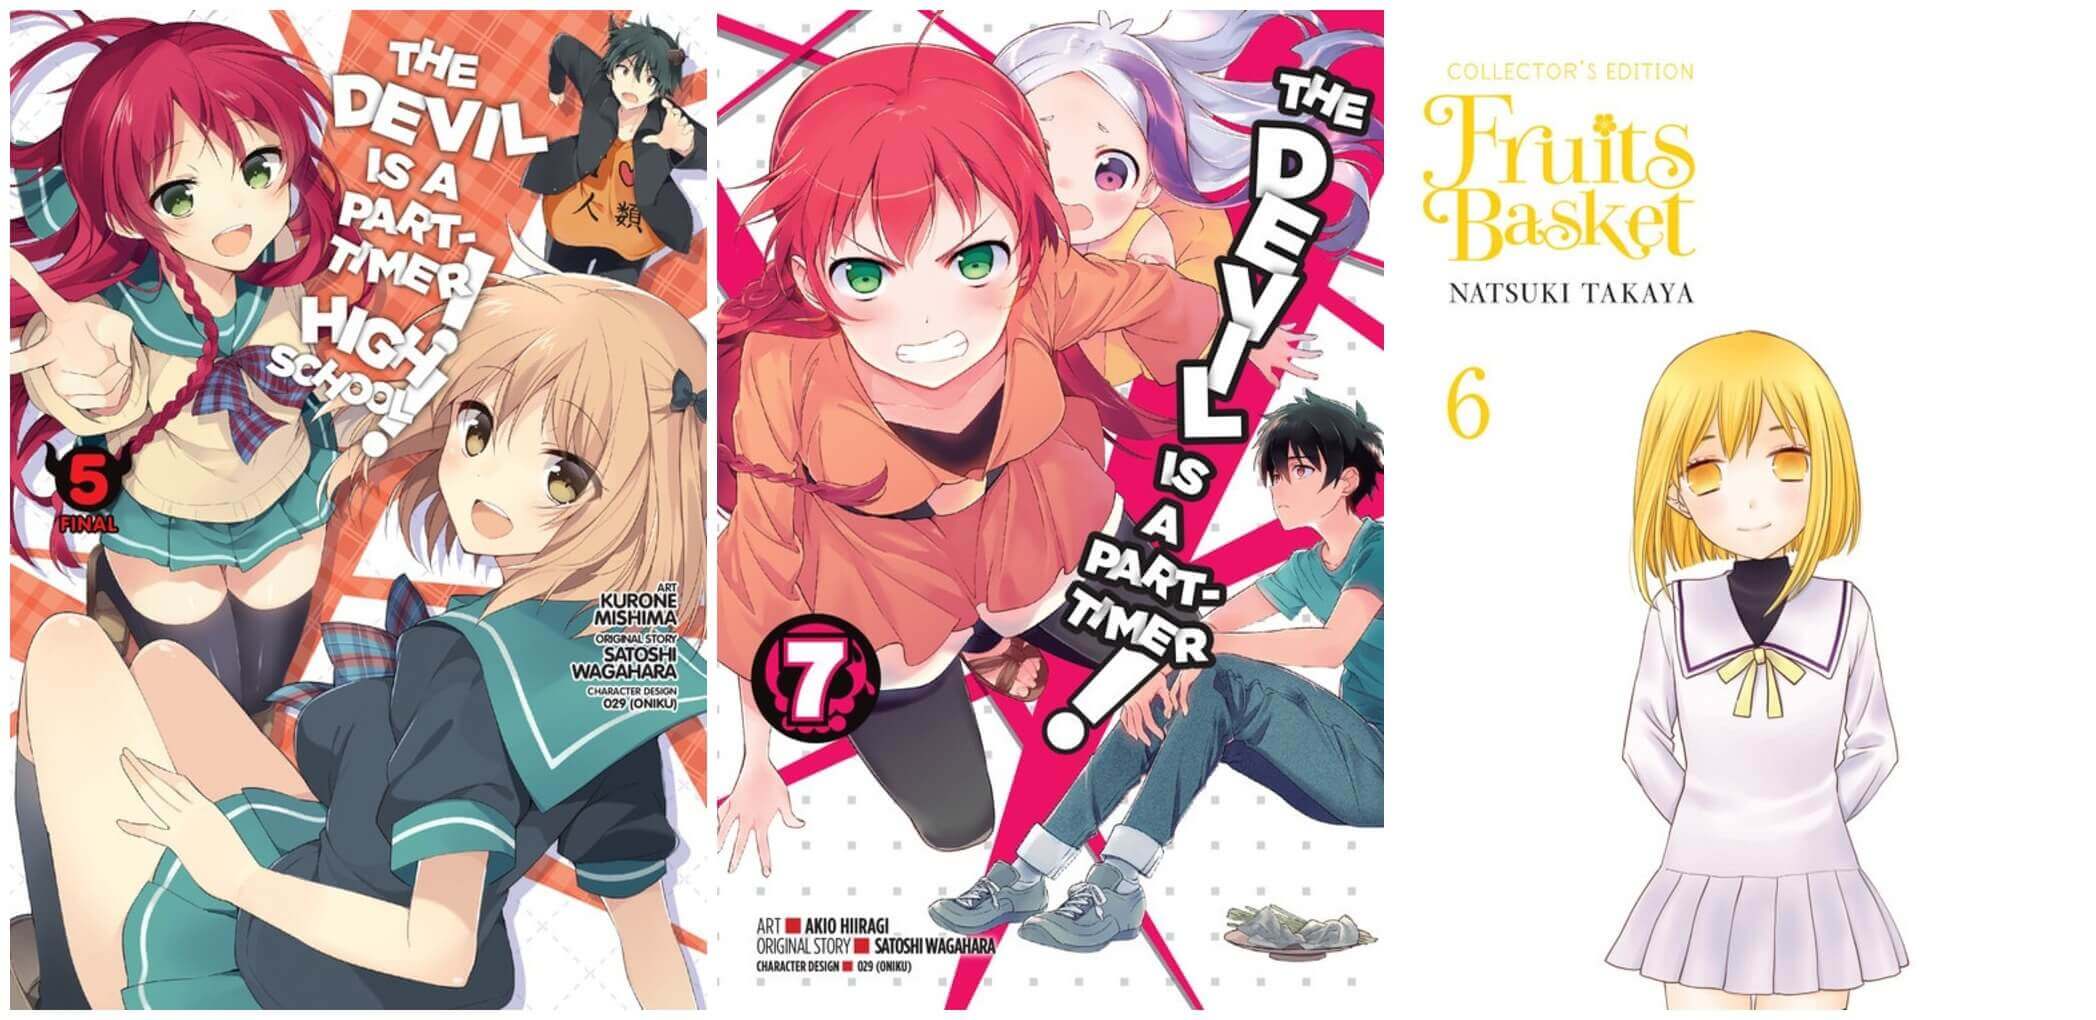 October 2016 Manga Releases Covers for The Devil is a Part-Timer High School, The Devil is a Part-Timer, and Fruits Basket.